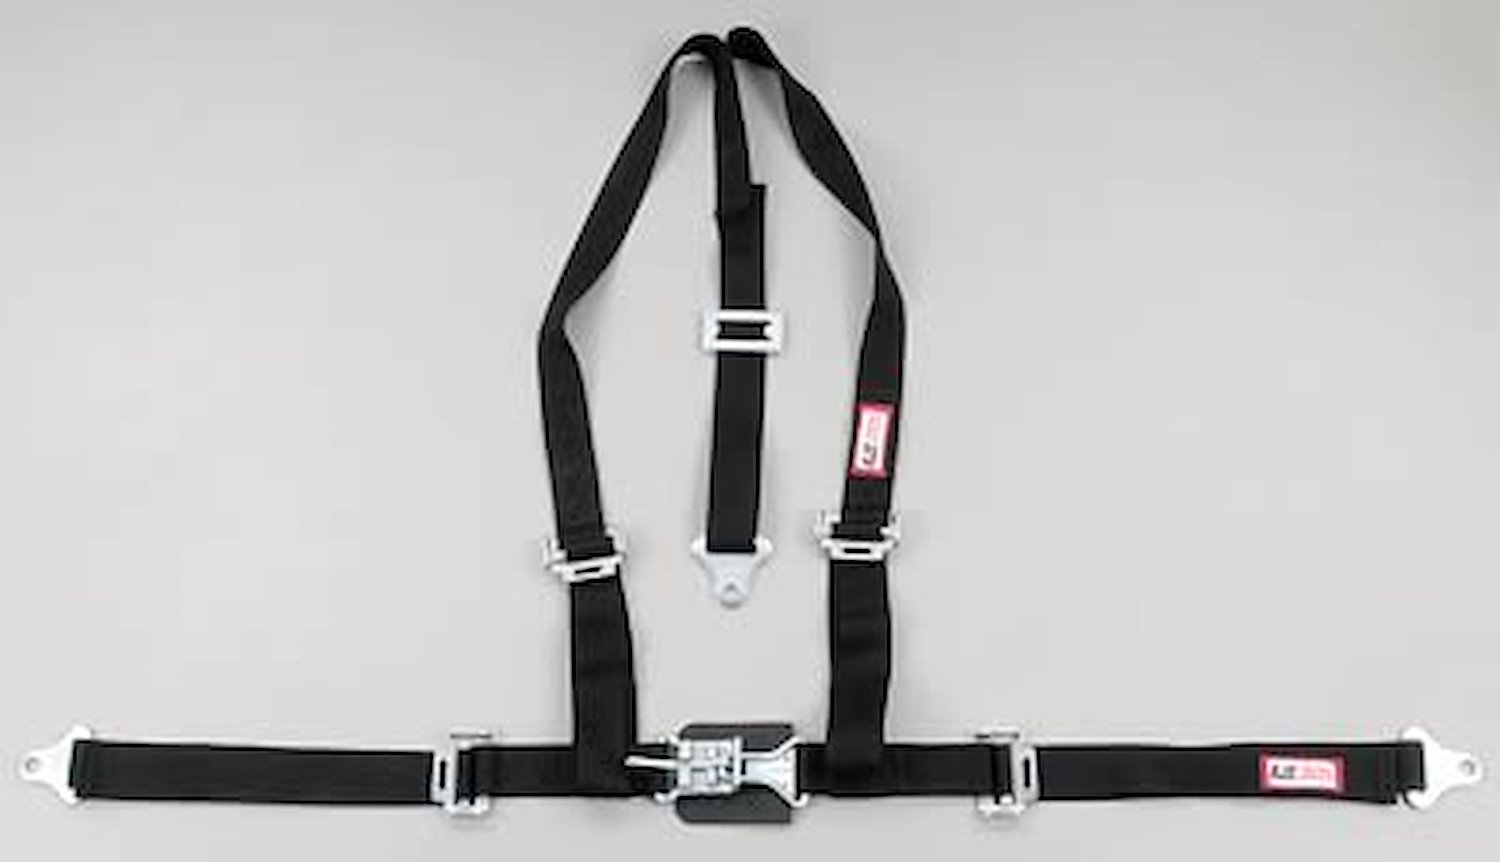 NON-SFI L&L HARNESS 3 PULL DOWN Lap Belt SNAP SEWN IN 2 S.H. Individual FLOOR Mount WRAP/BOLT BLACK